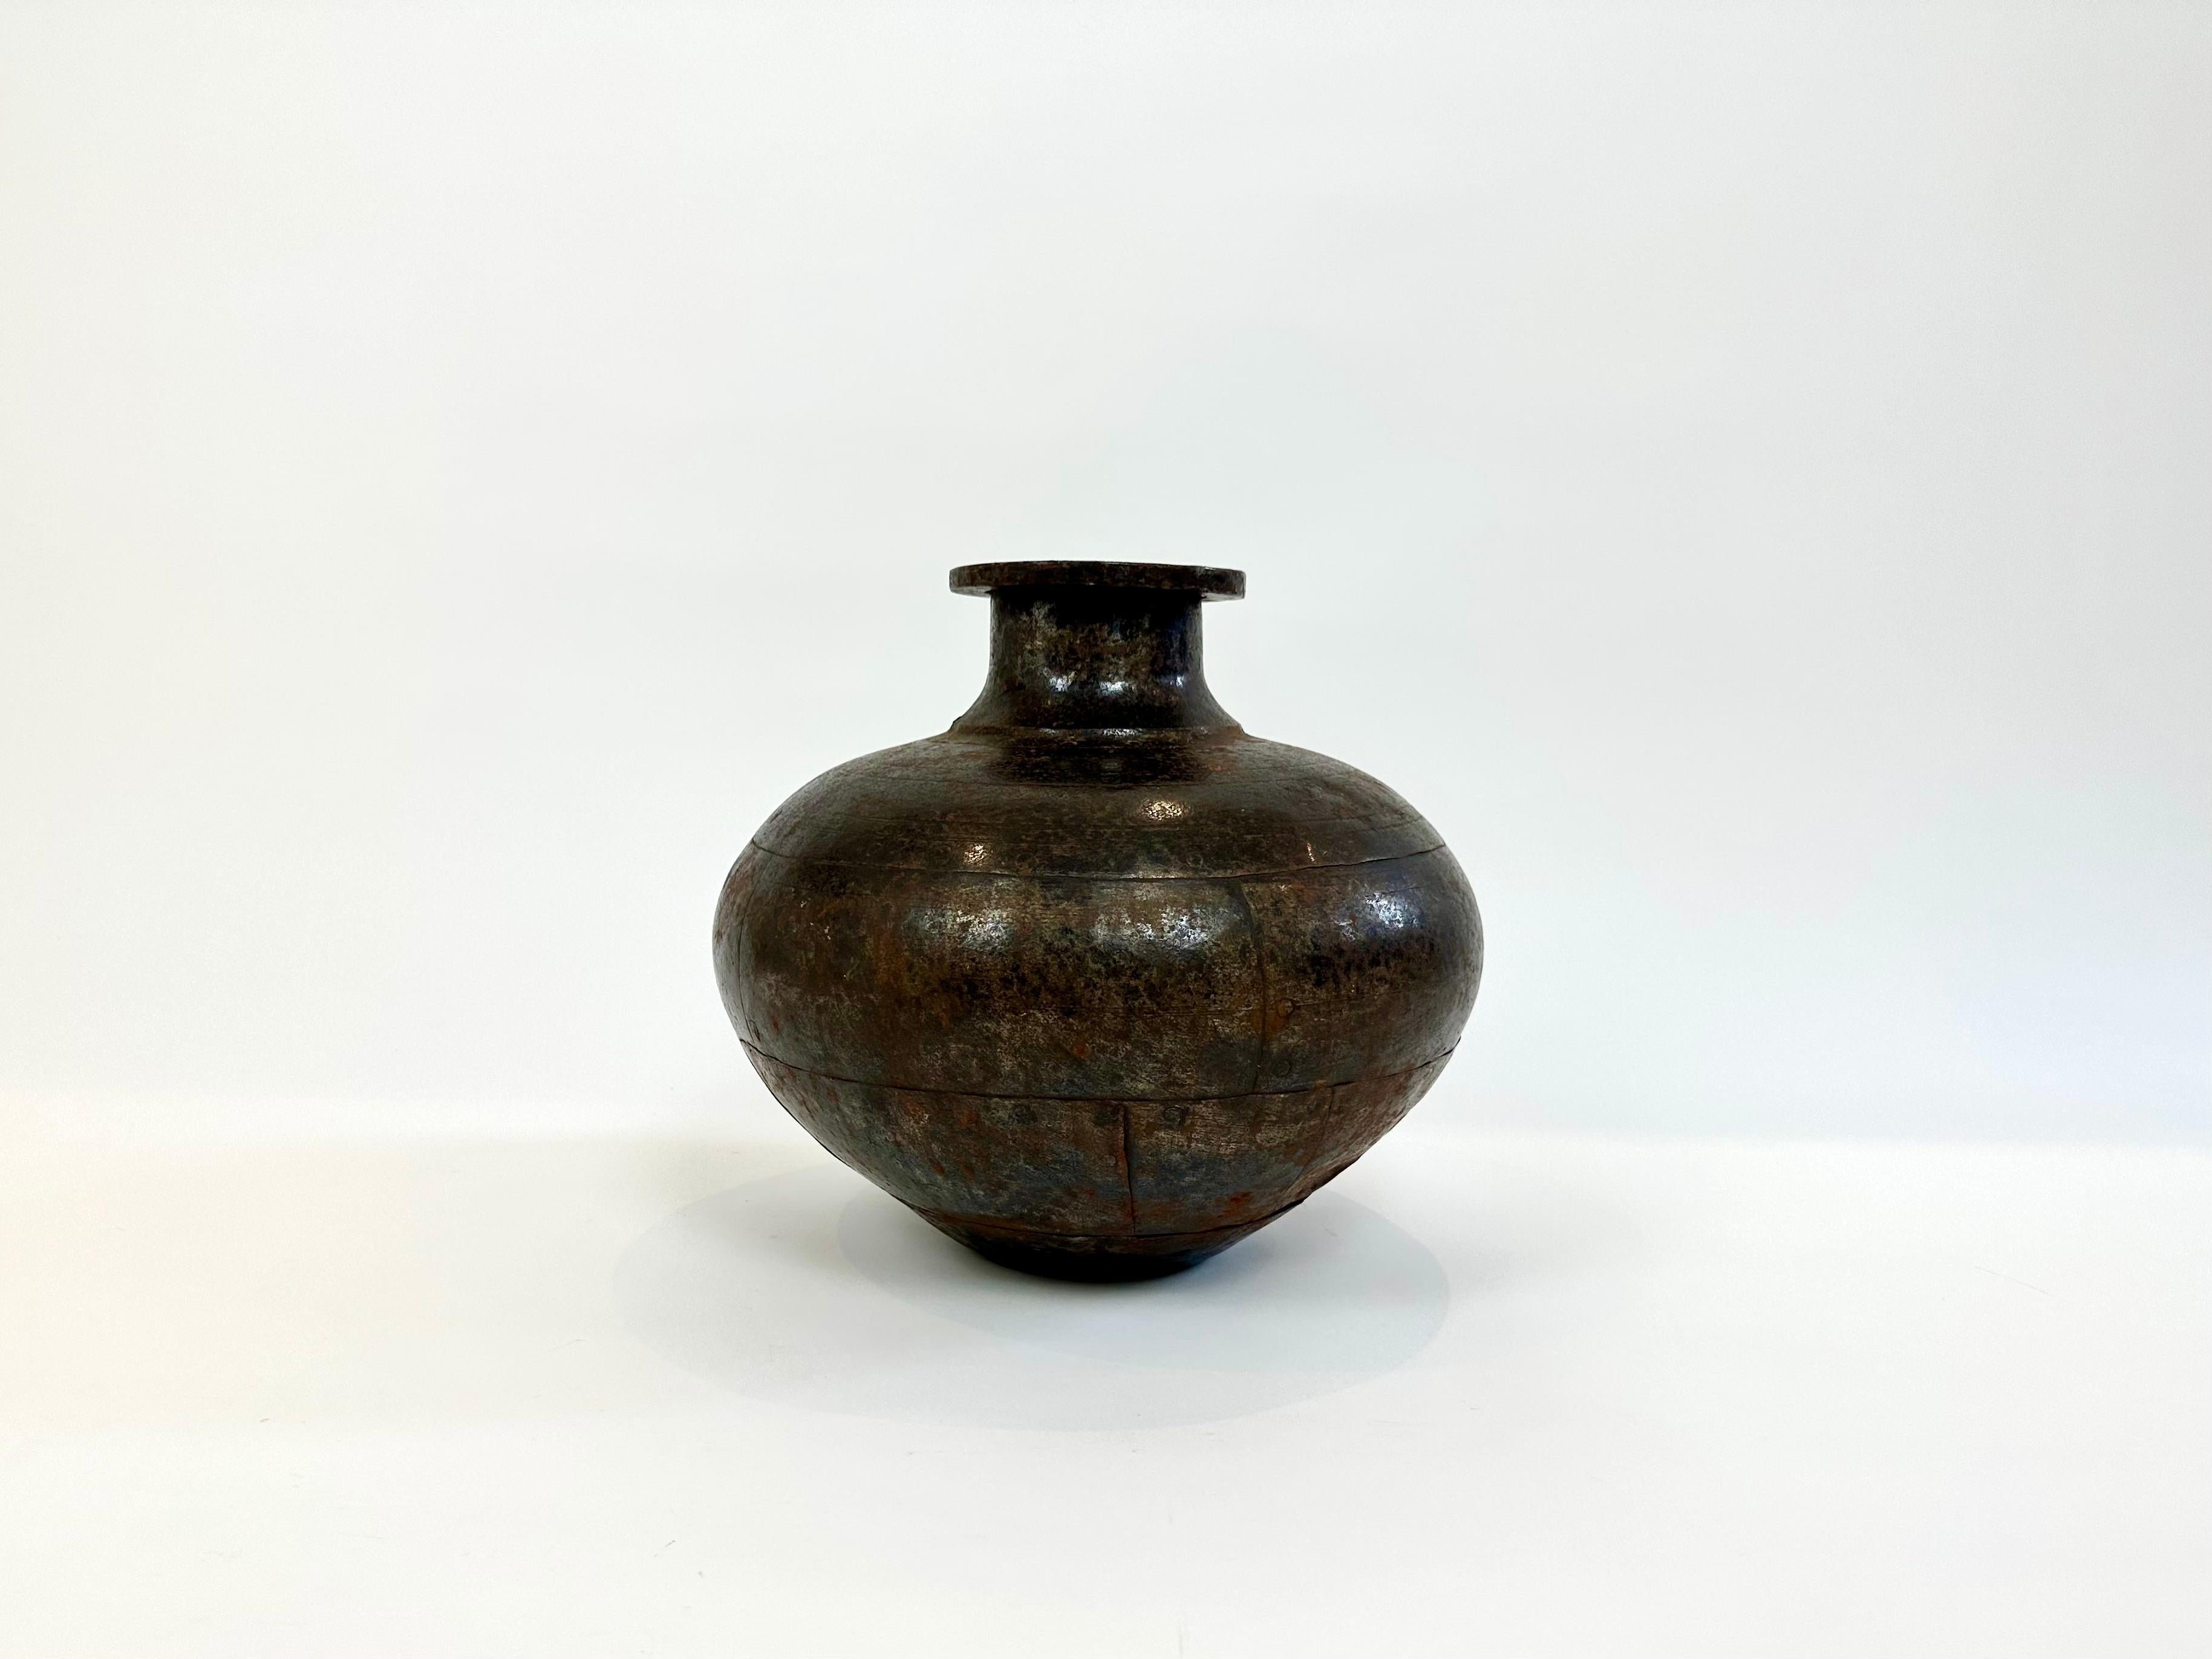 Large size rustic hand made metal pot / vase, ideal for display purposes.

Superb patina to the metal which has been waxed to preserve the finish. 

Worldwide shipping - Message before buying for an quote to your destination.